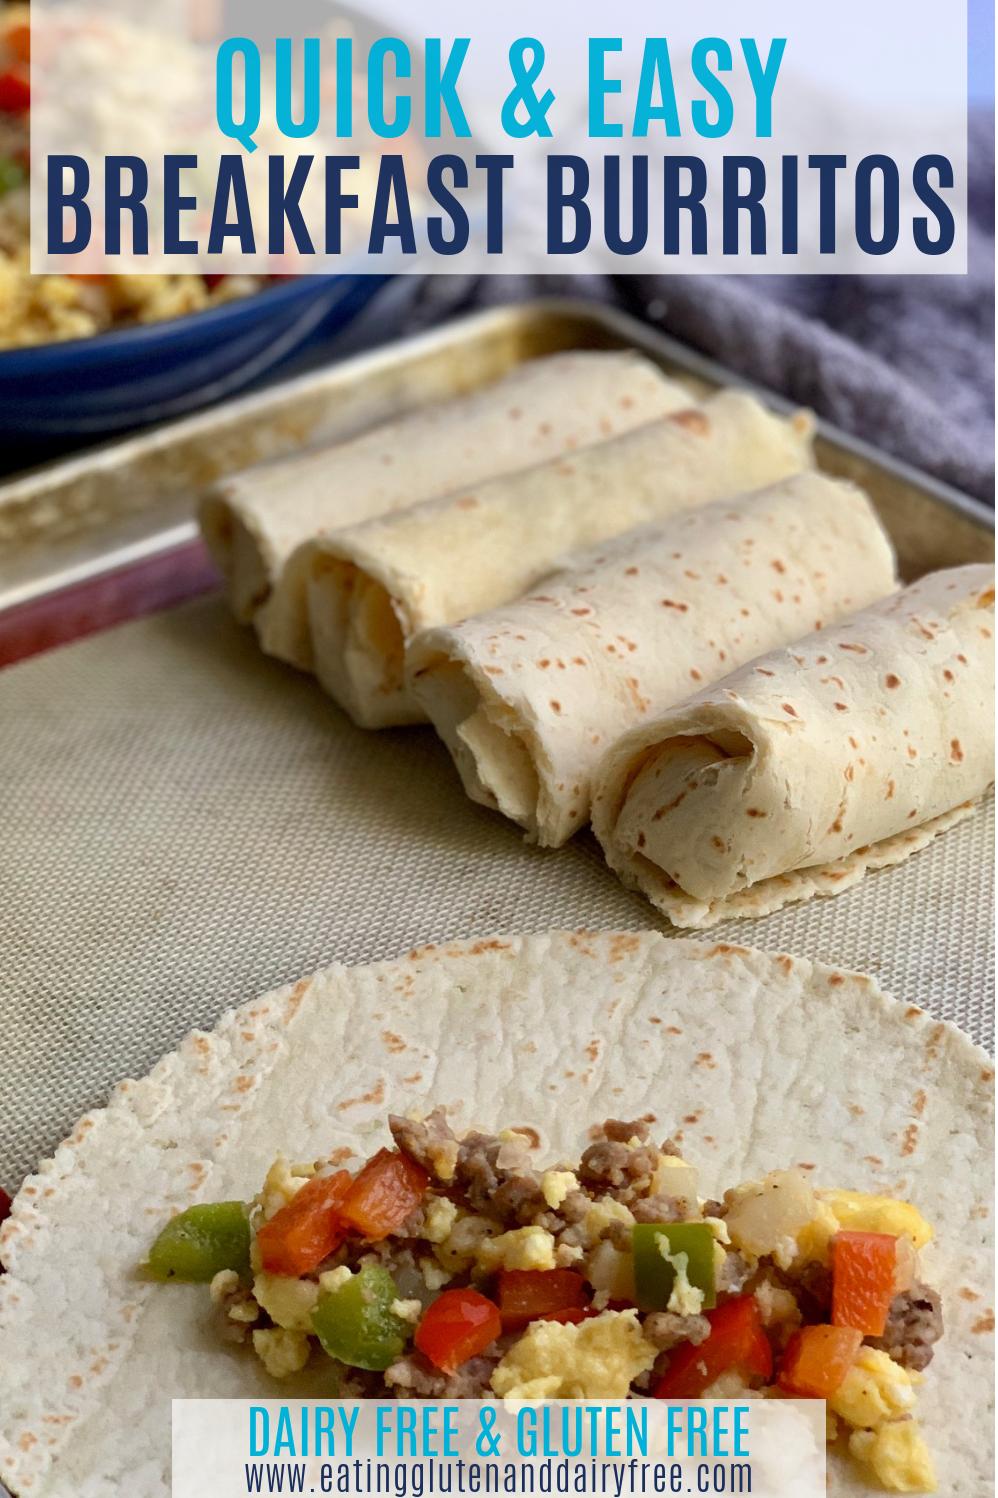  Rise and shine with this delicious Dairy-Free Breakfast Burrito!